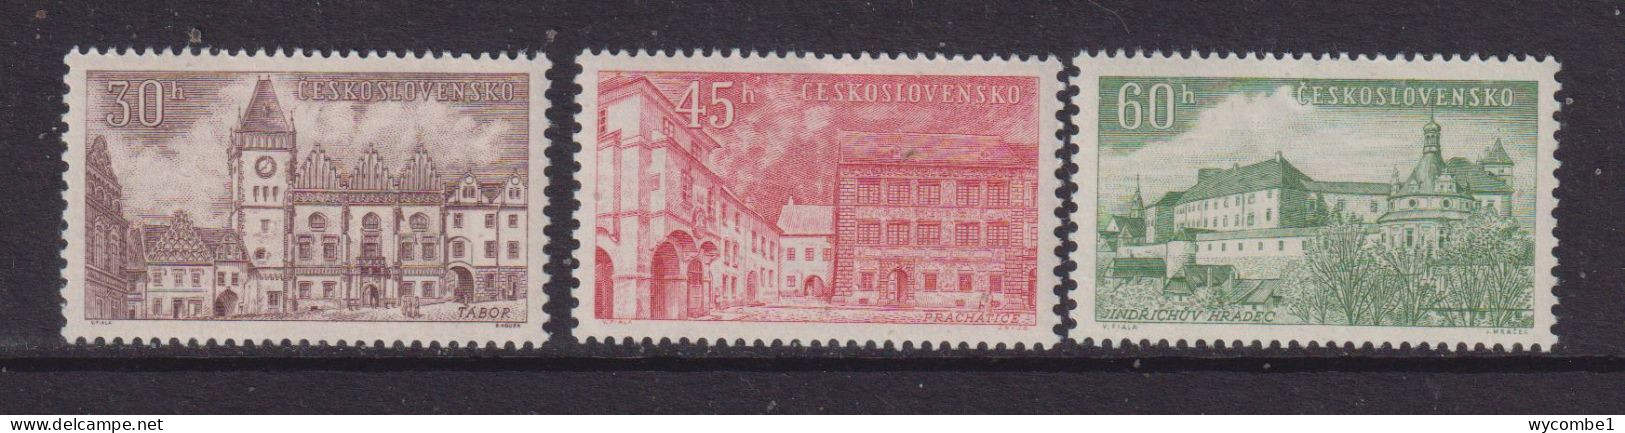 CZECHOSLOVAKIA  - 1955  Towns In Southern Bohemia Set  Never Hinged Mint - Unused Stamps